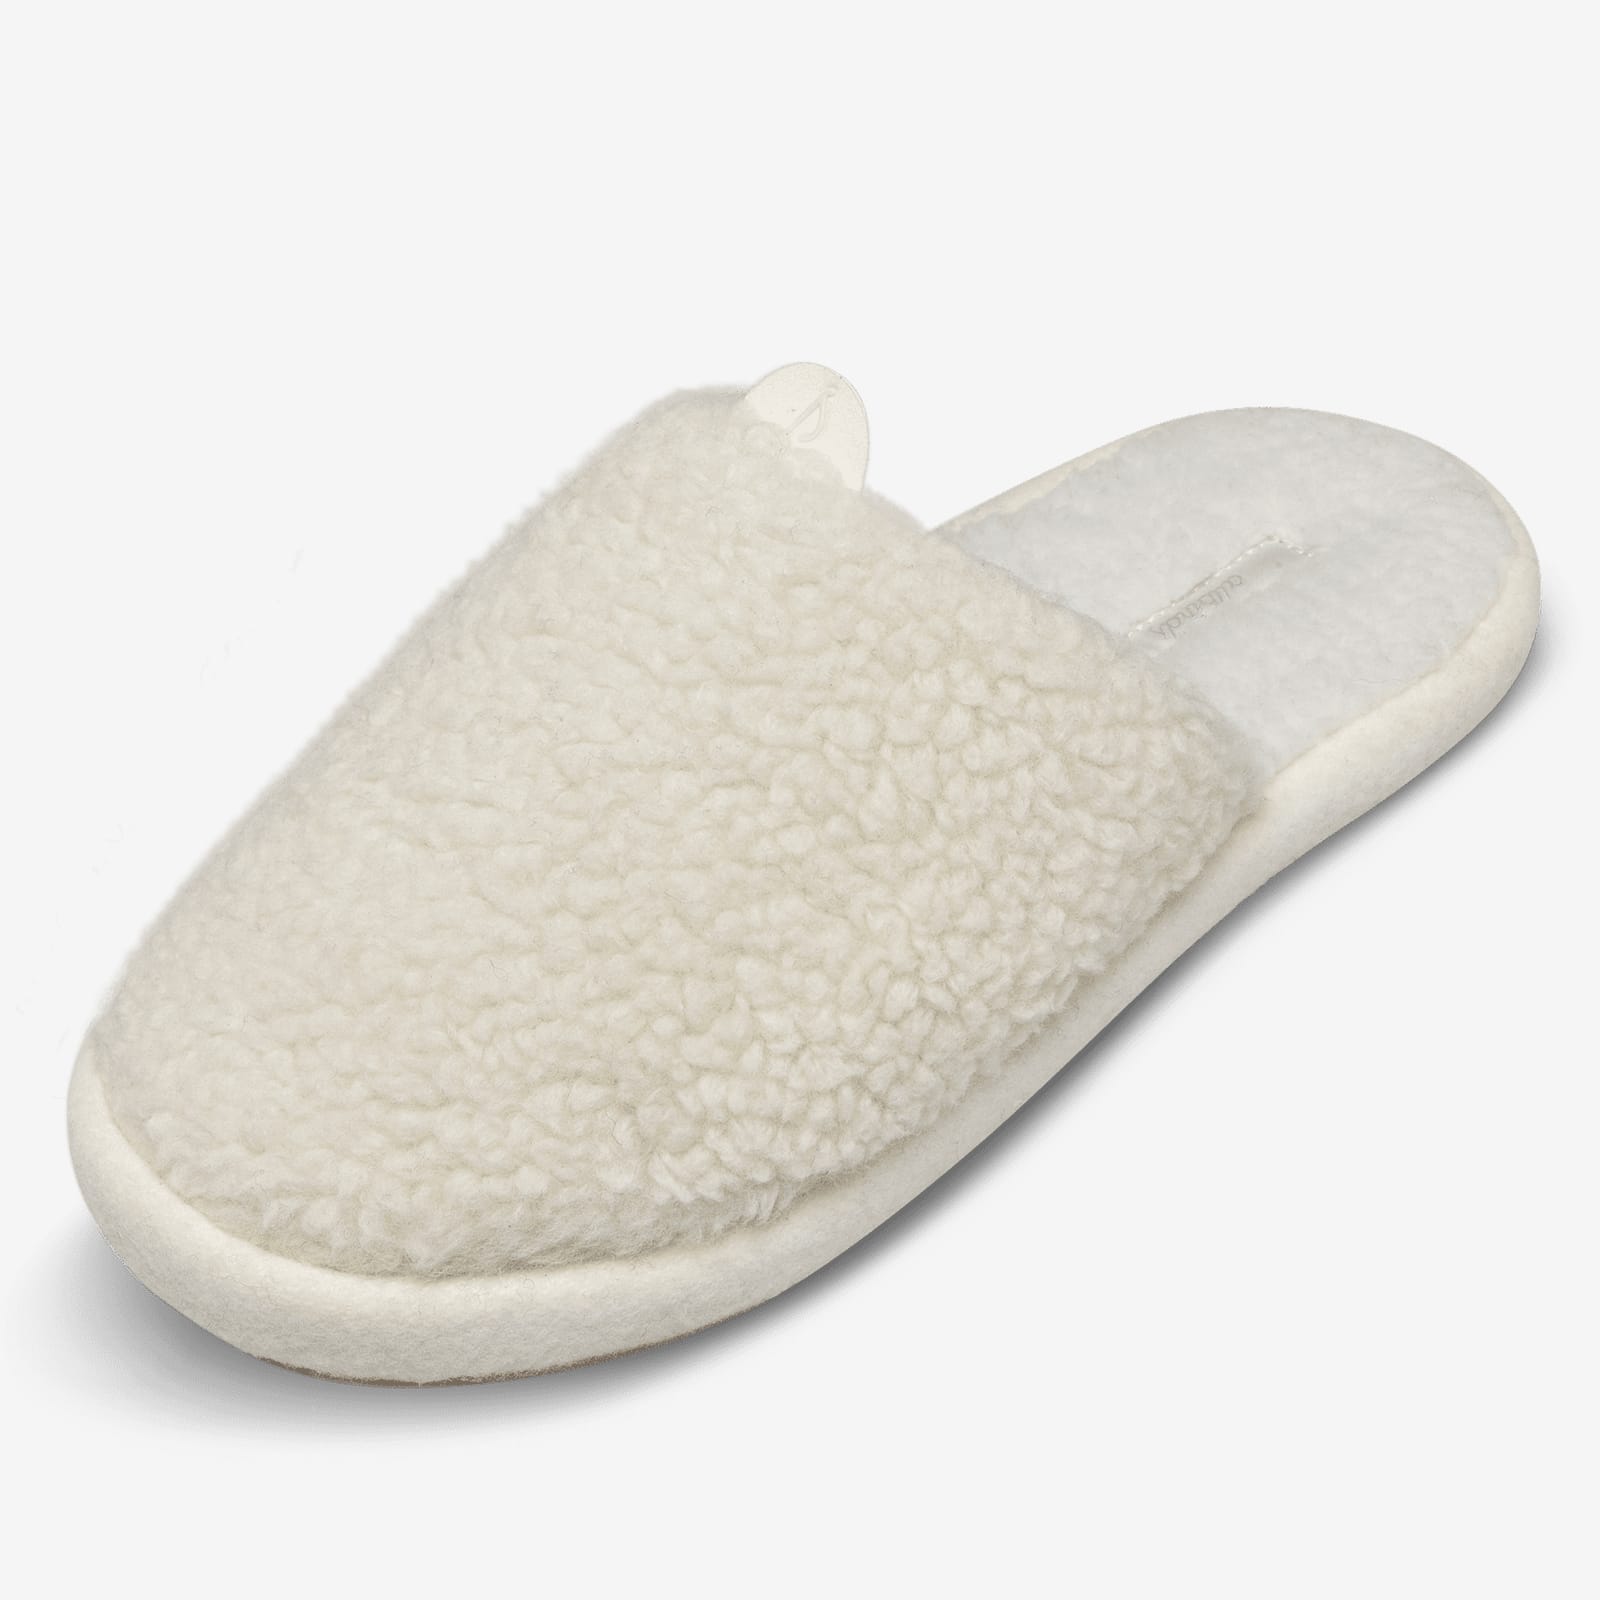 Allbirds Slippers - Wool Dwellers - Natural White Fluffs (White Sole ...